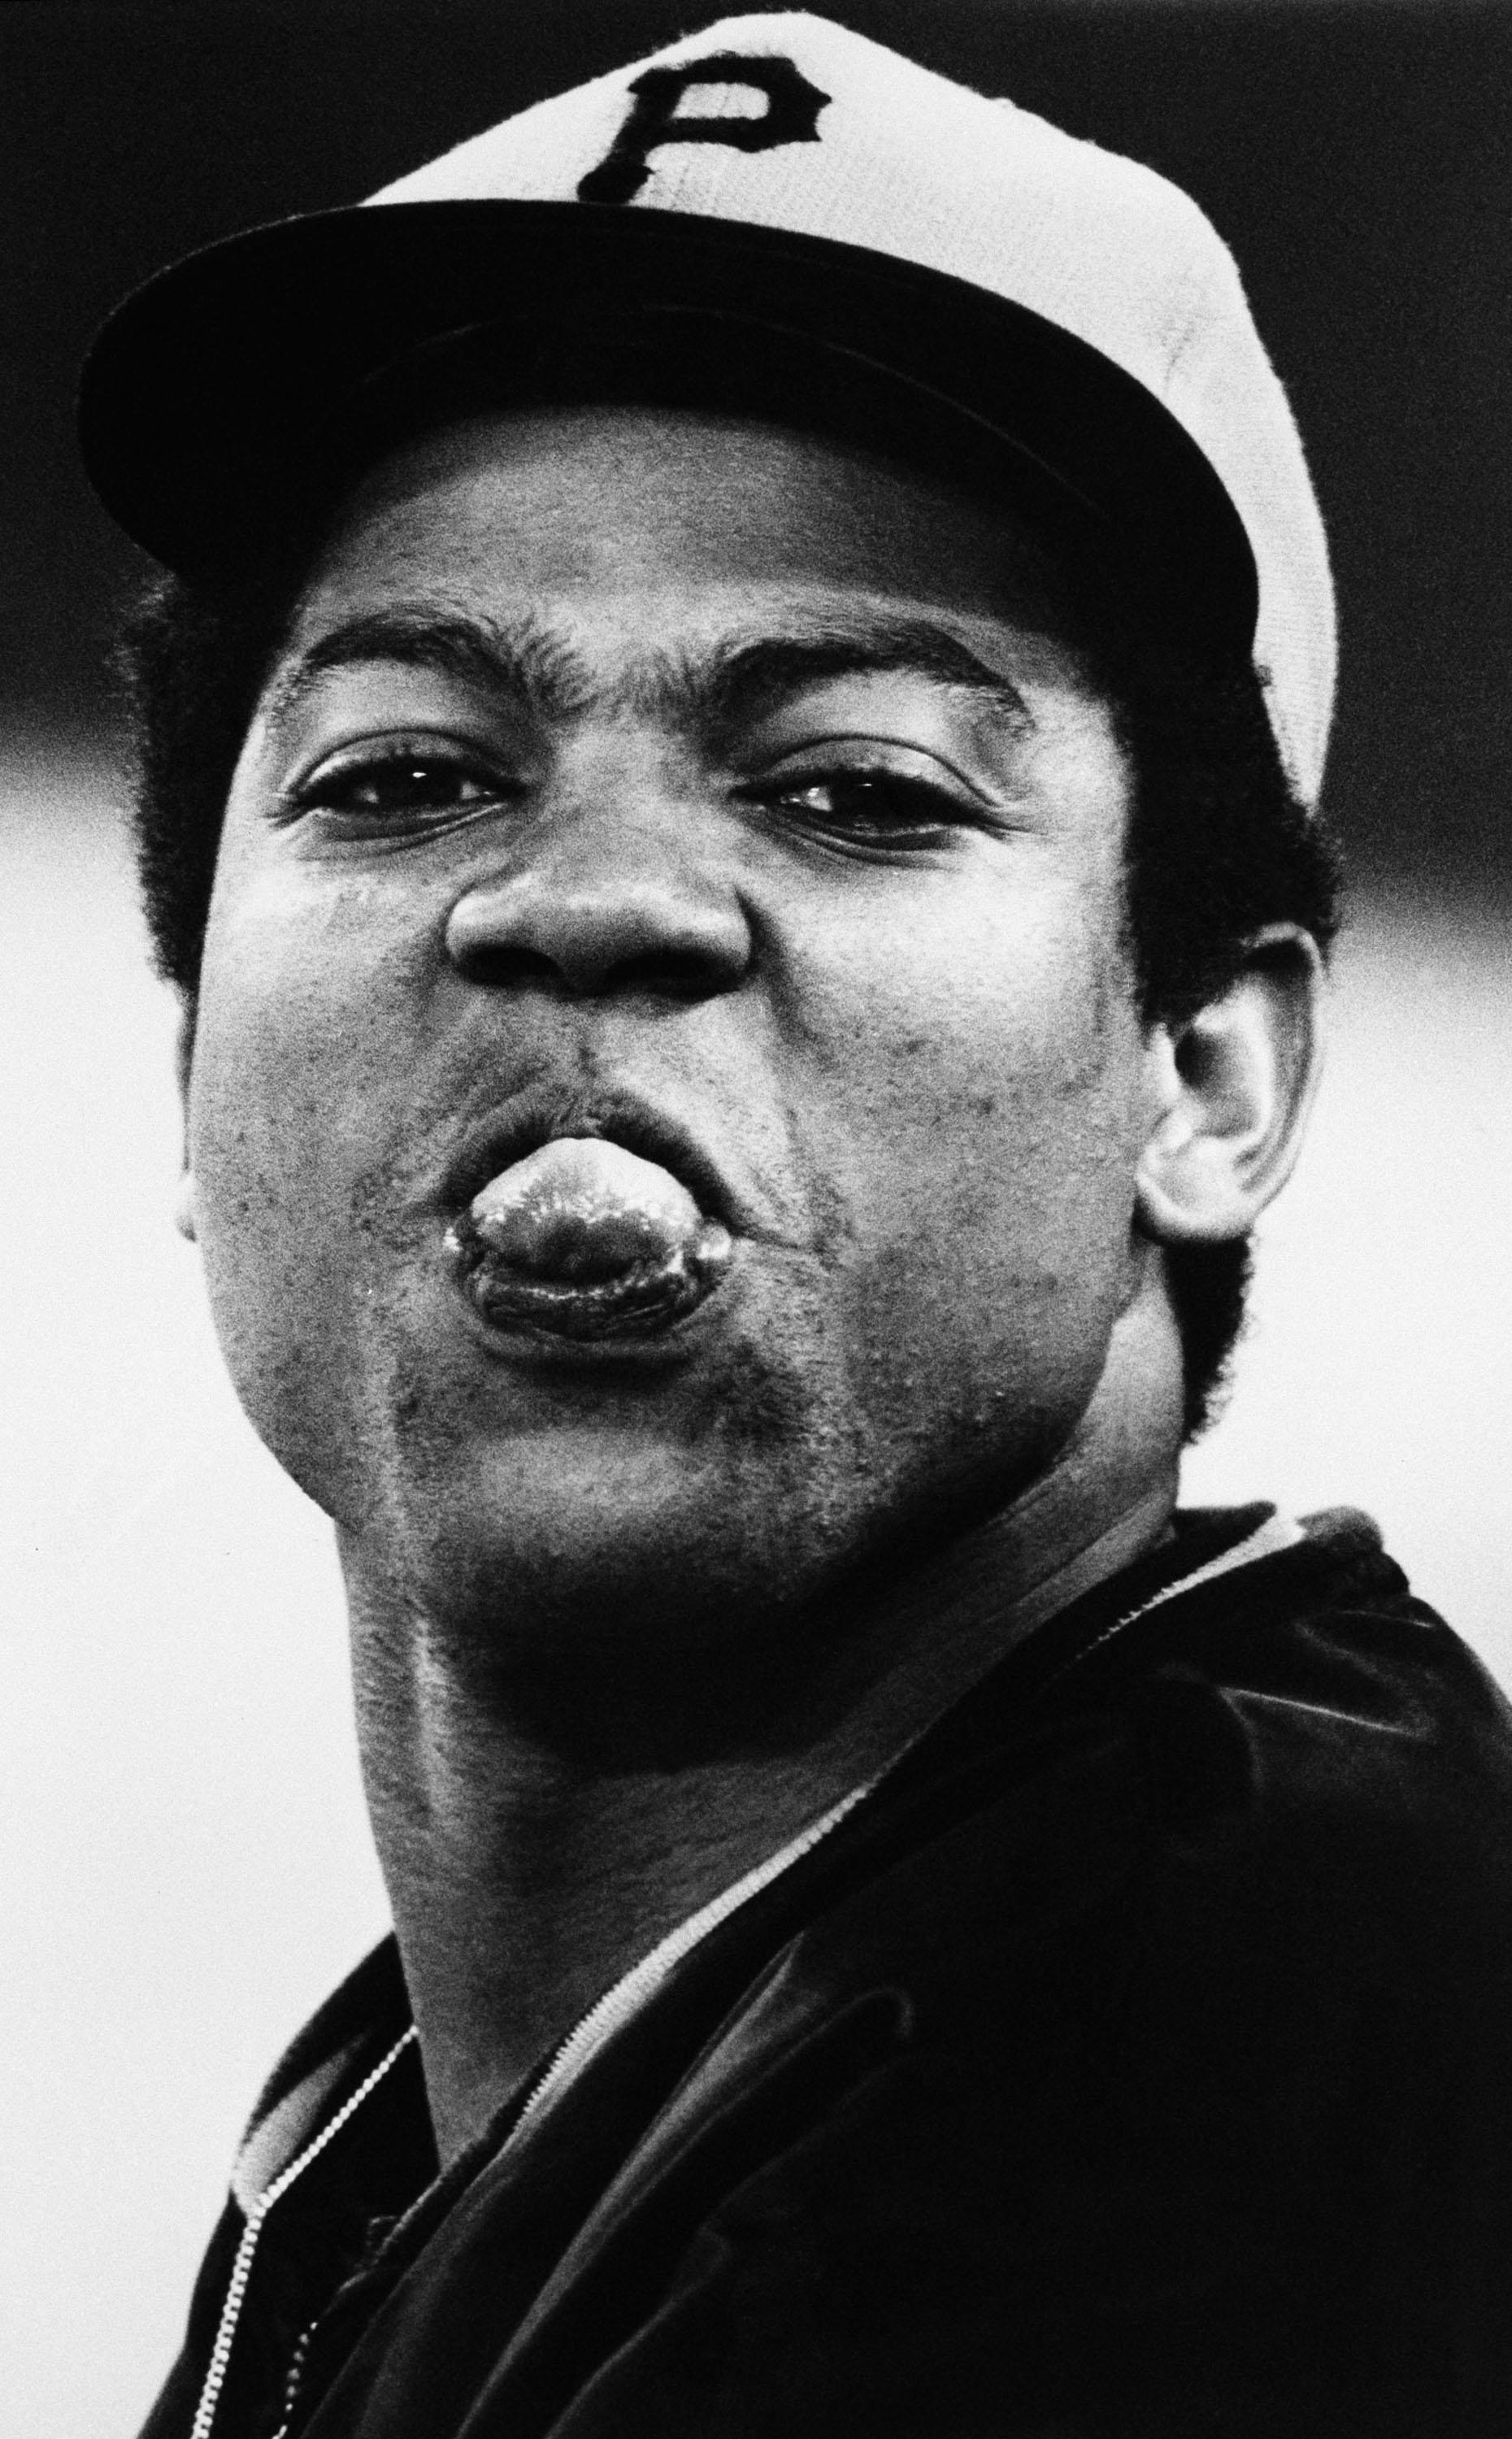 The Paris Review - Finding a Hall of Fame for Dock Ellis